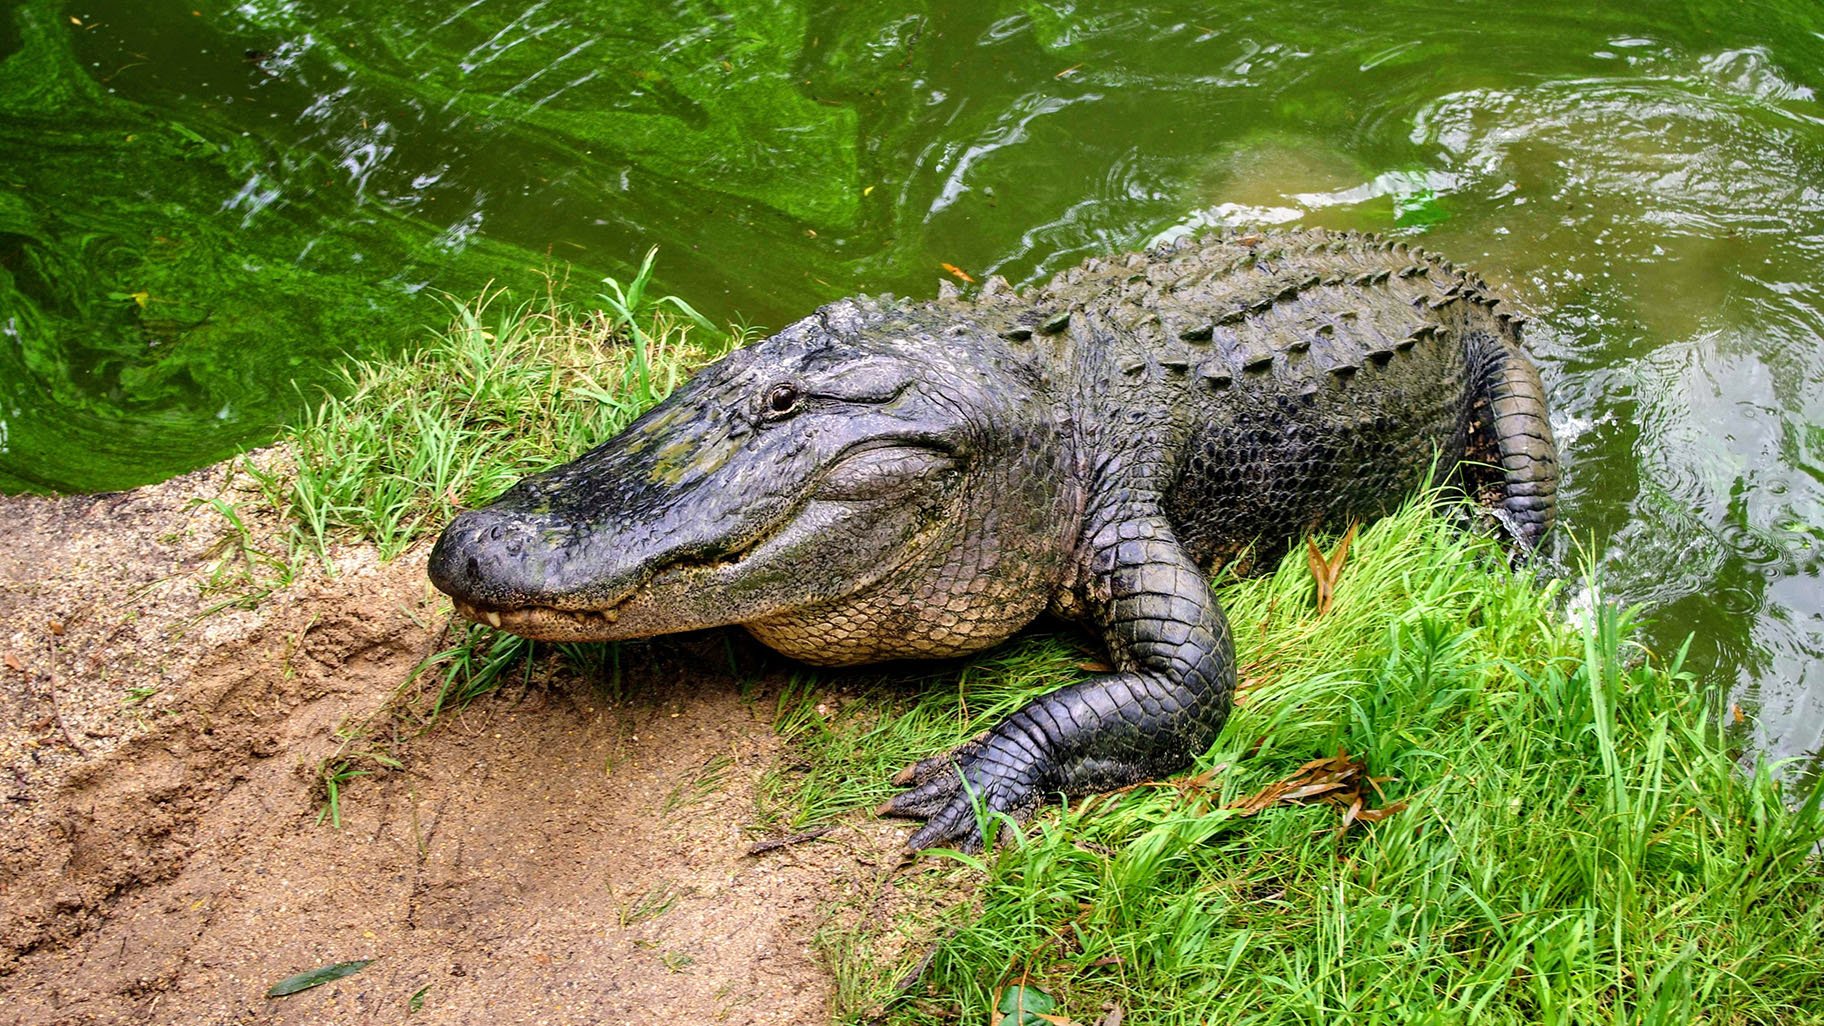 If I had an alligator as a pet …